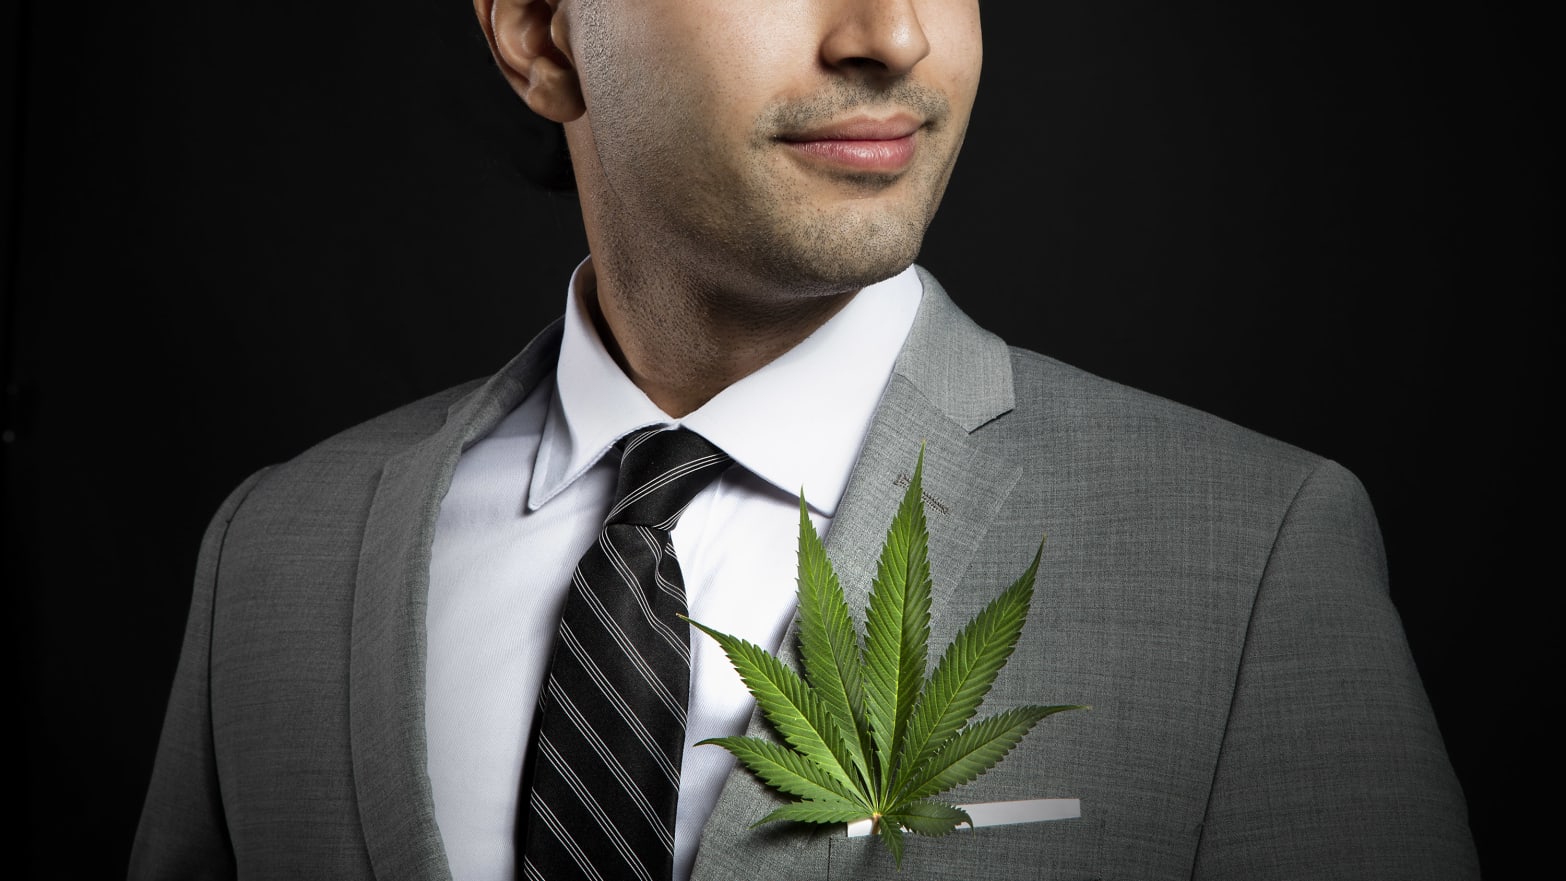 image of man in a suit with a marijuana leaf in his pocket 420 pot weed cannabis gender gap sex roles parity men women male female